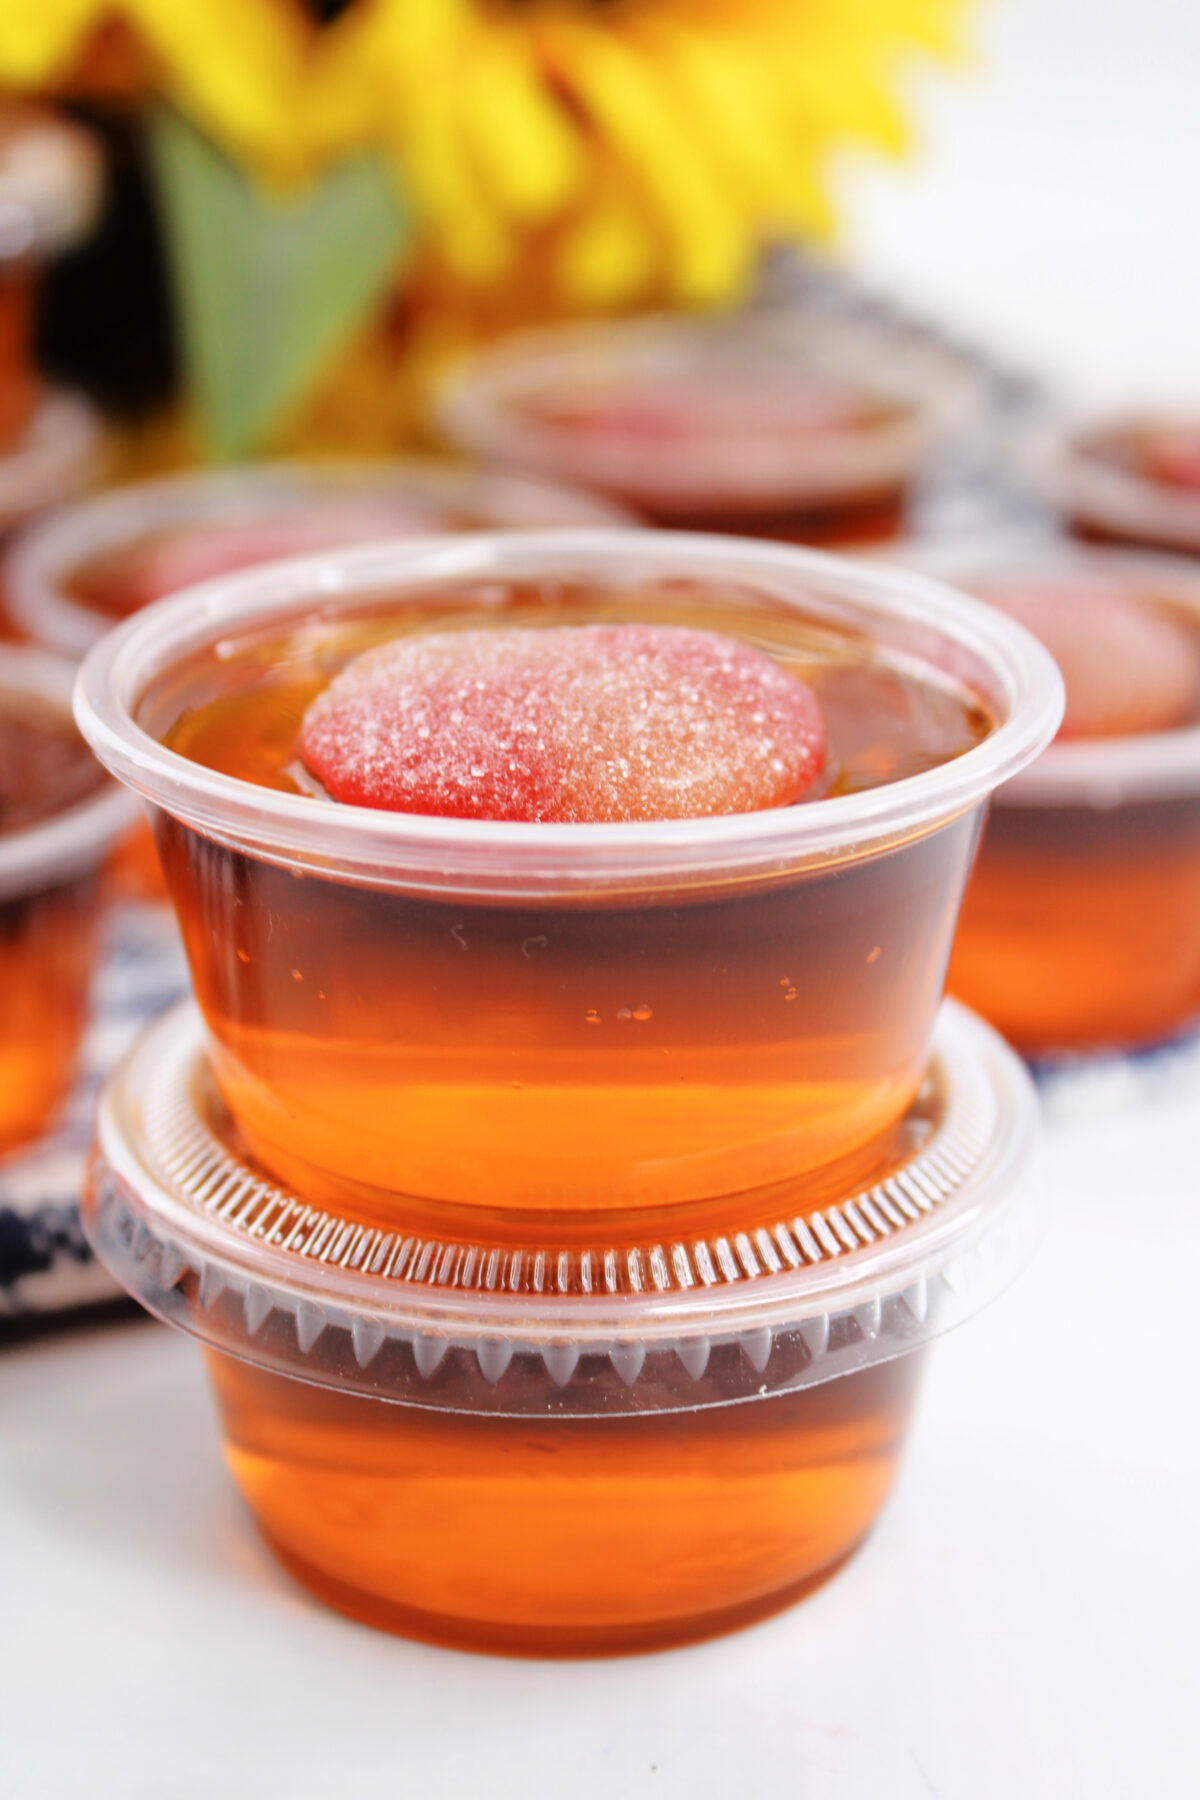 Looking for a fun and easy party recipe? These Crown Peach Jello Shots are perfect for your next get together!